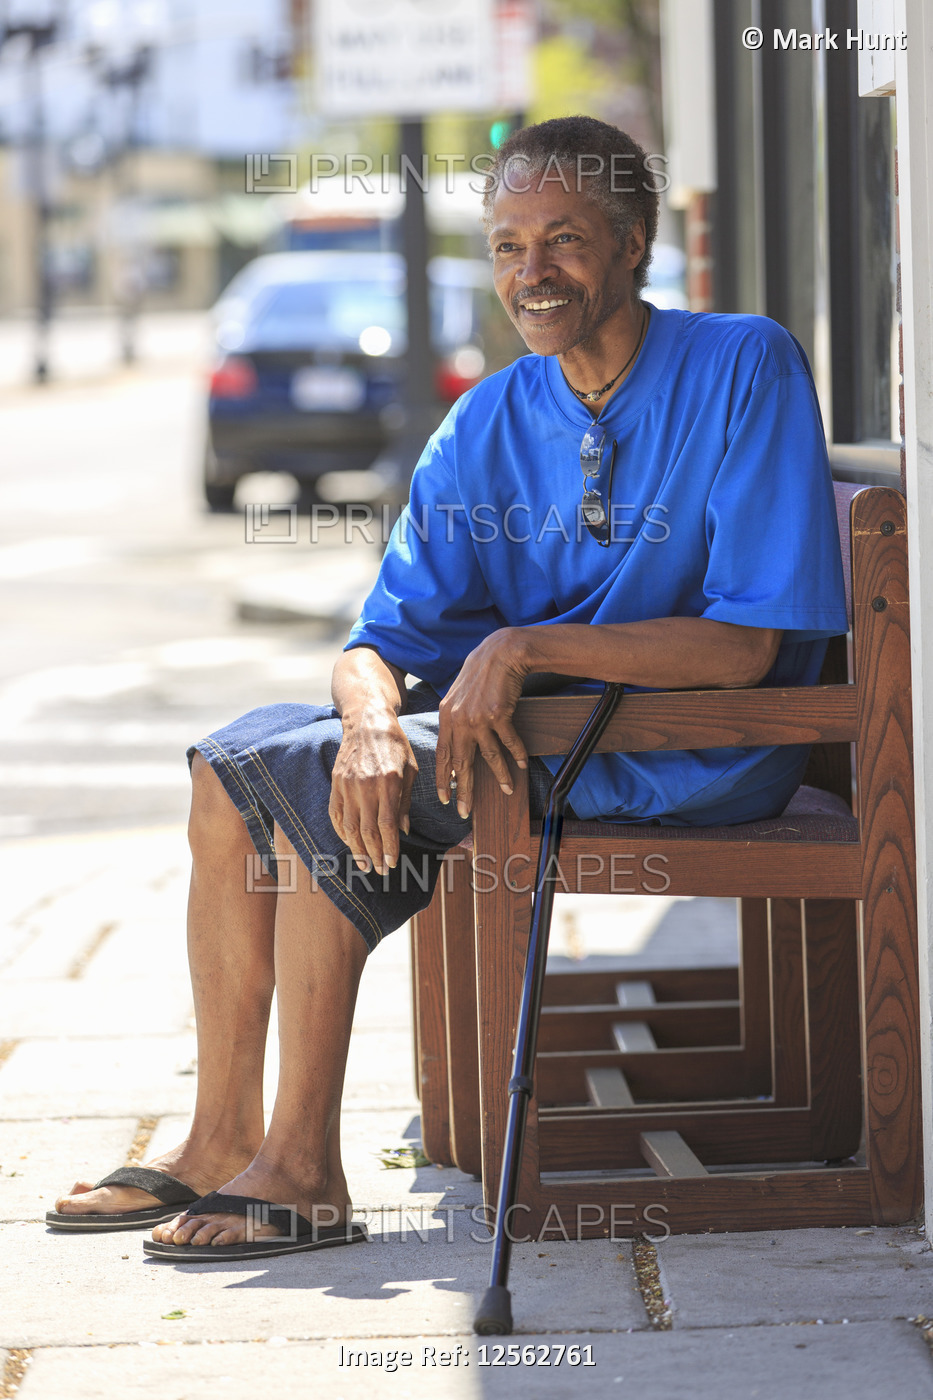 Man with Traumatic Brain Injury relaxing with his cane near the city street